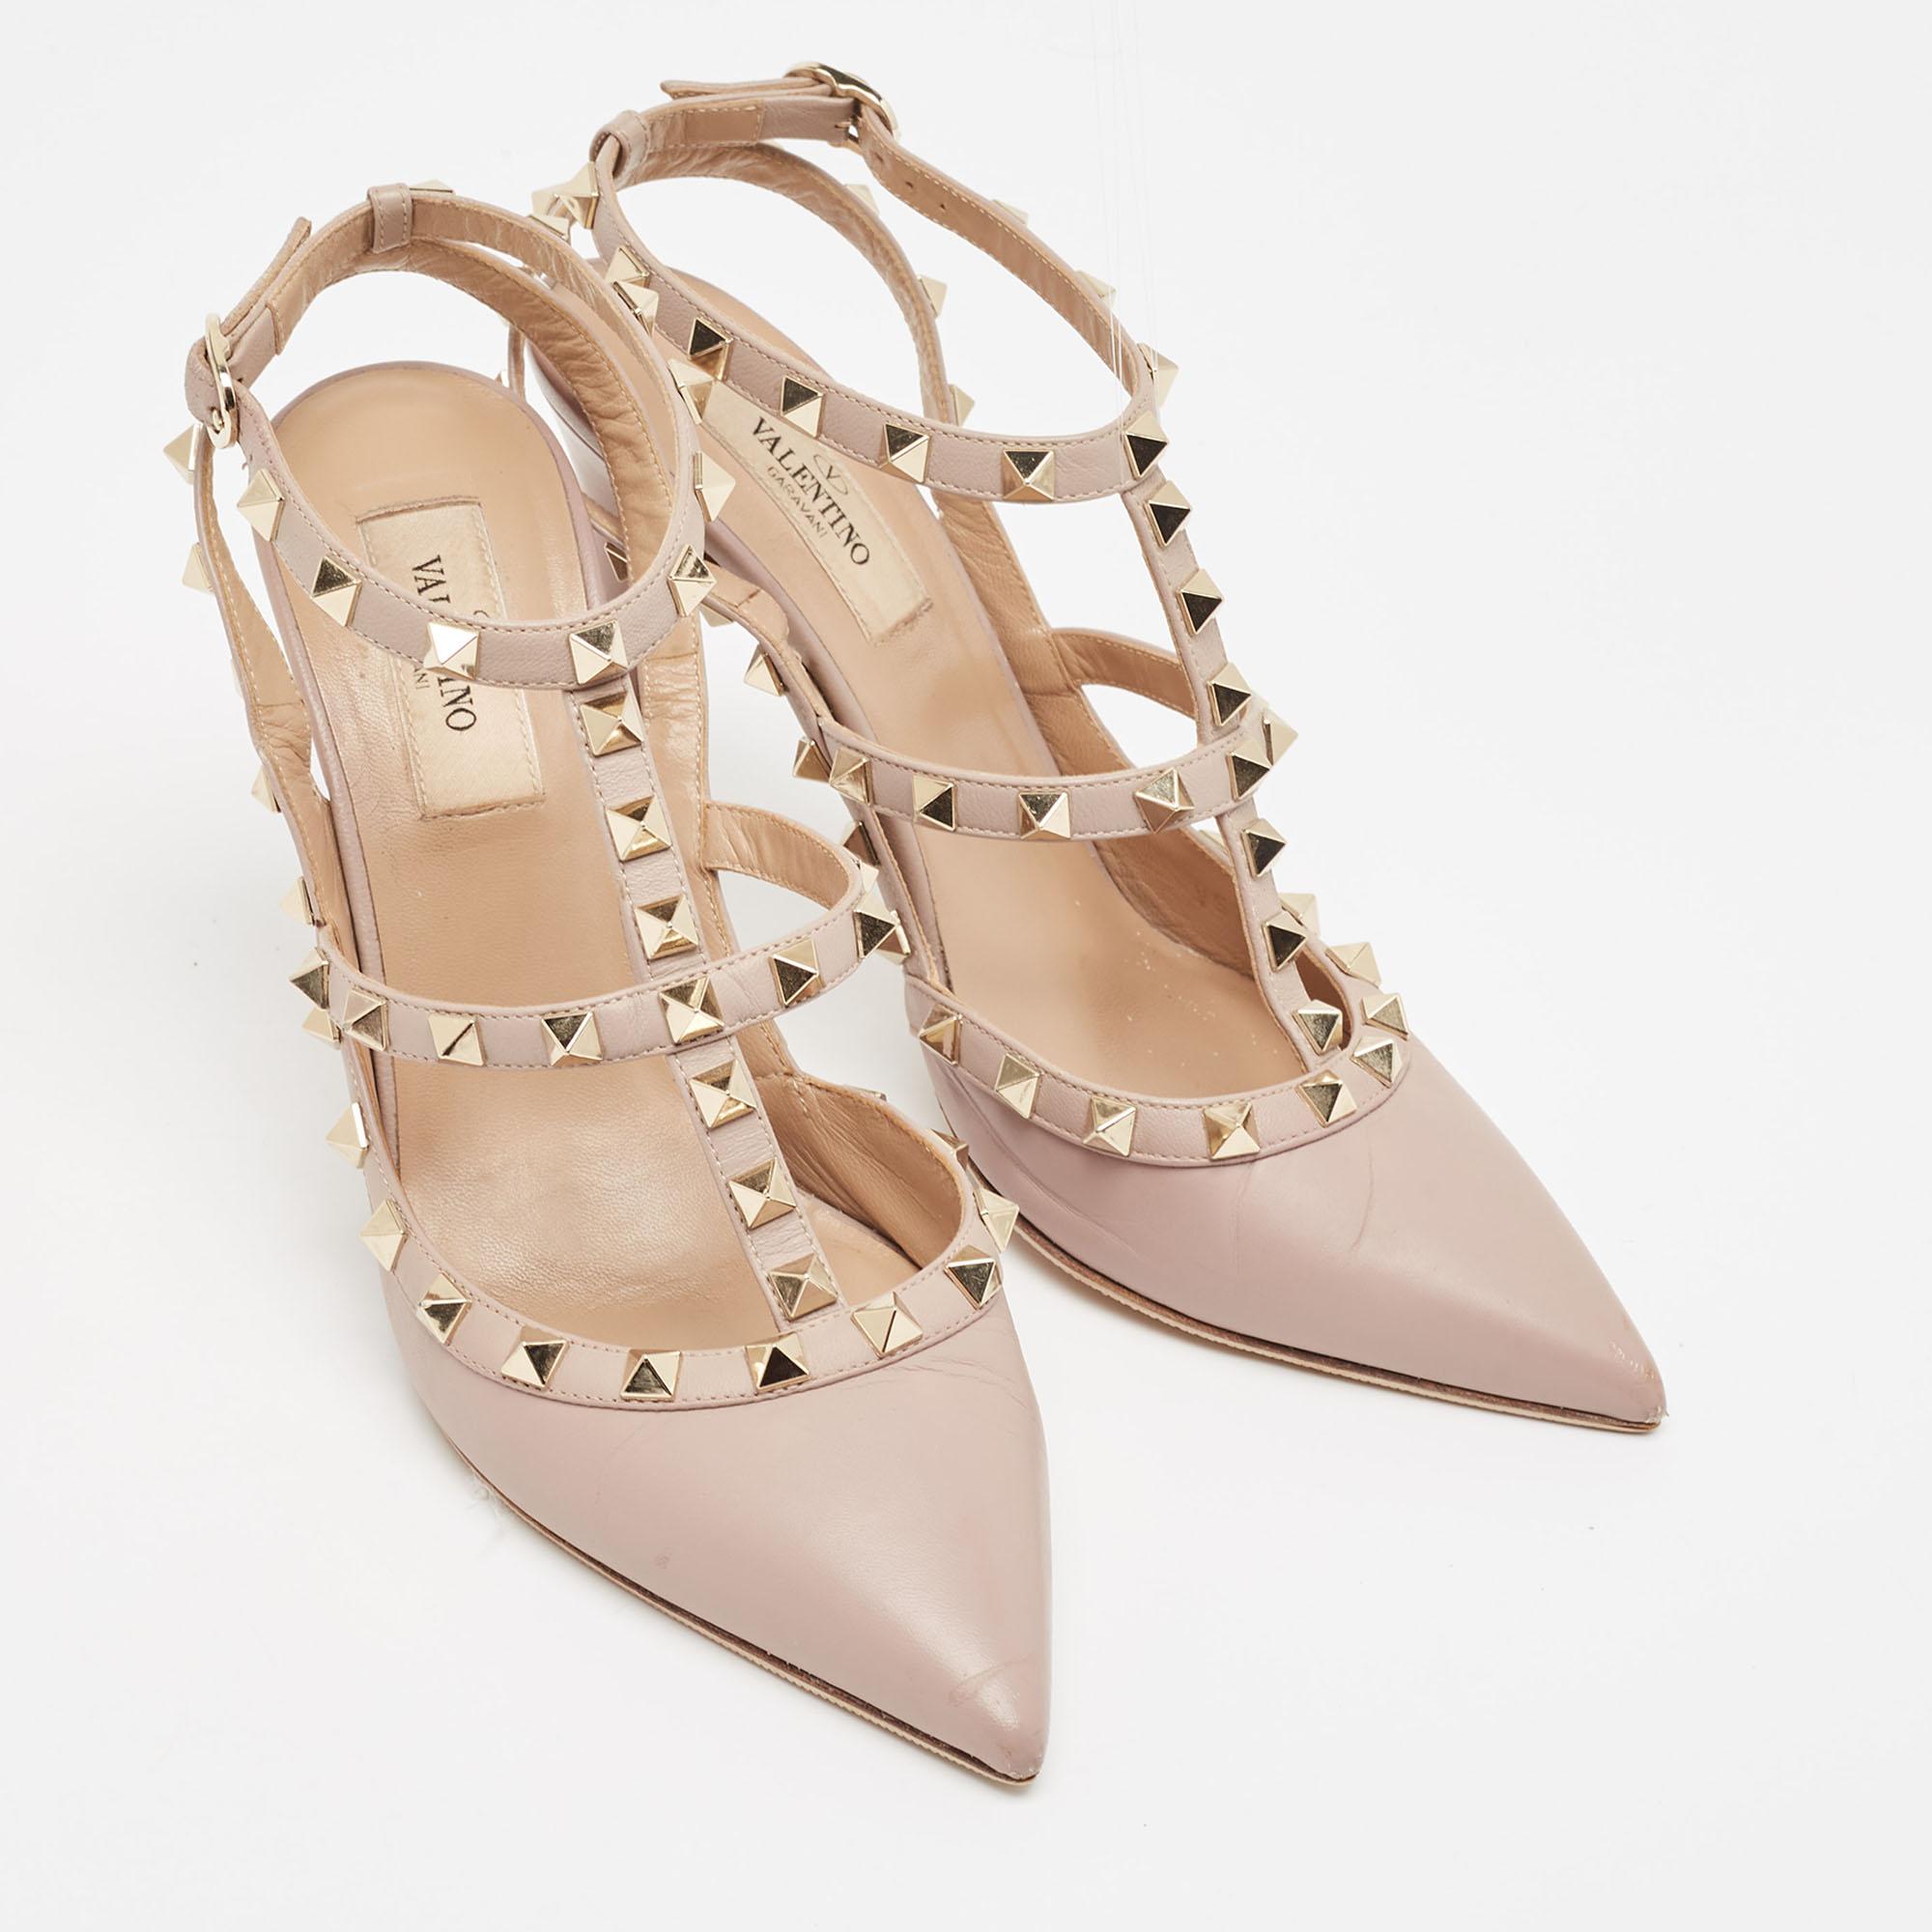 Valentino Dusty Pink Leather Rockstud Ankle Strap Pumps Size 38 In Good Condition For Sale In Dubai, Al Qouz 2